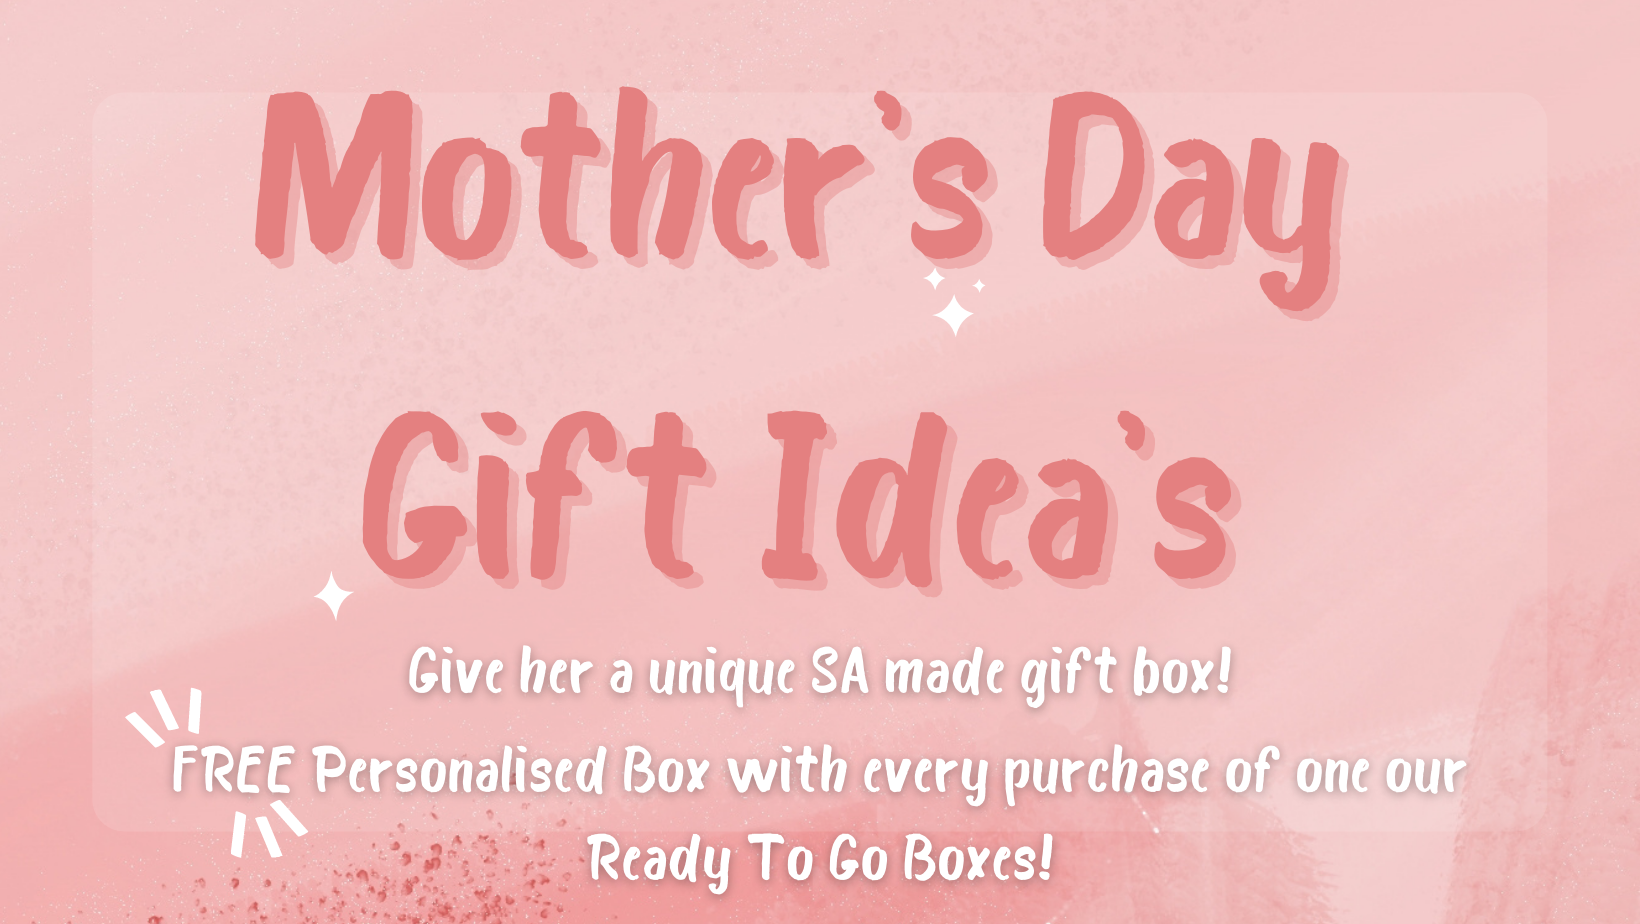 Mother's Day Gift Ideas Adelaide South Australia